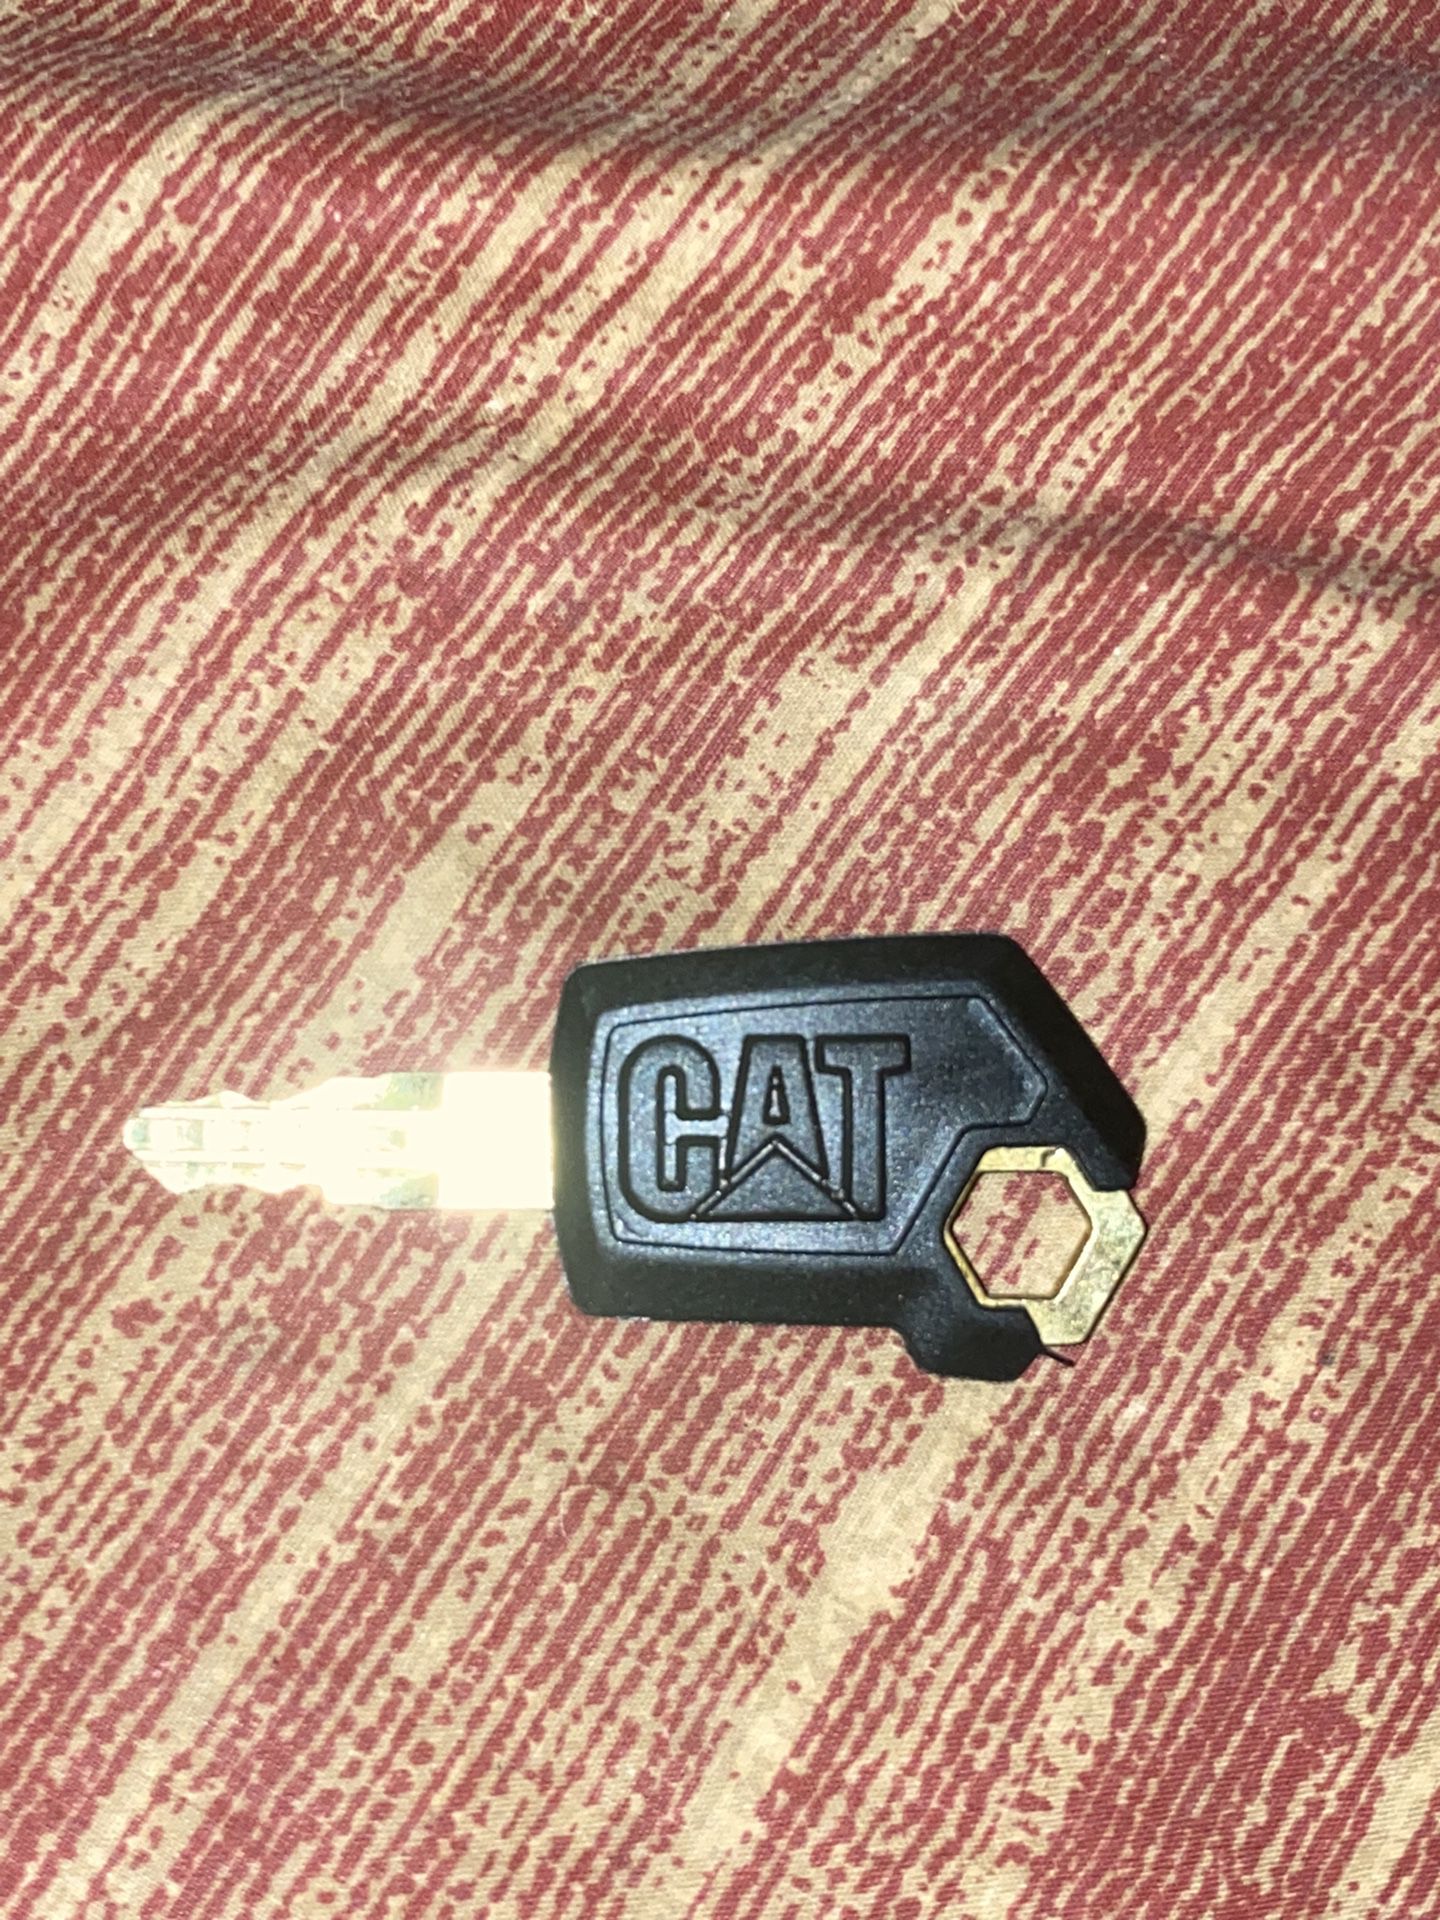 Caterpillar Ignition Key:  fits most CAT Ignitions from 1970’s to current -Rollers, Cat padlocks, Dozers, Backhoes, Compactors, Articulated Trucks, Ex